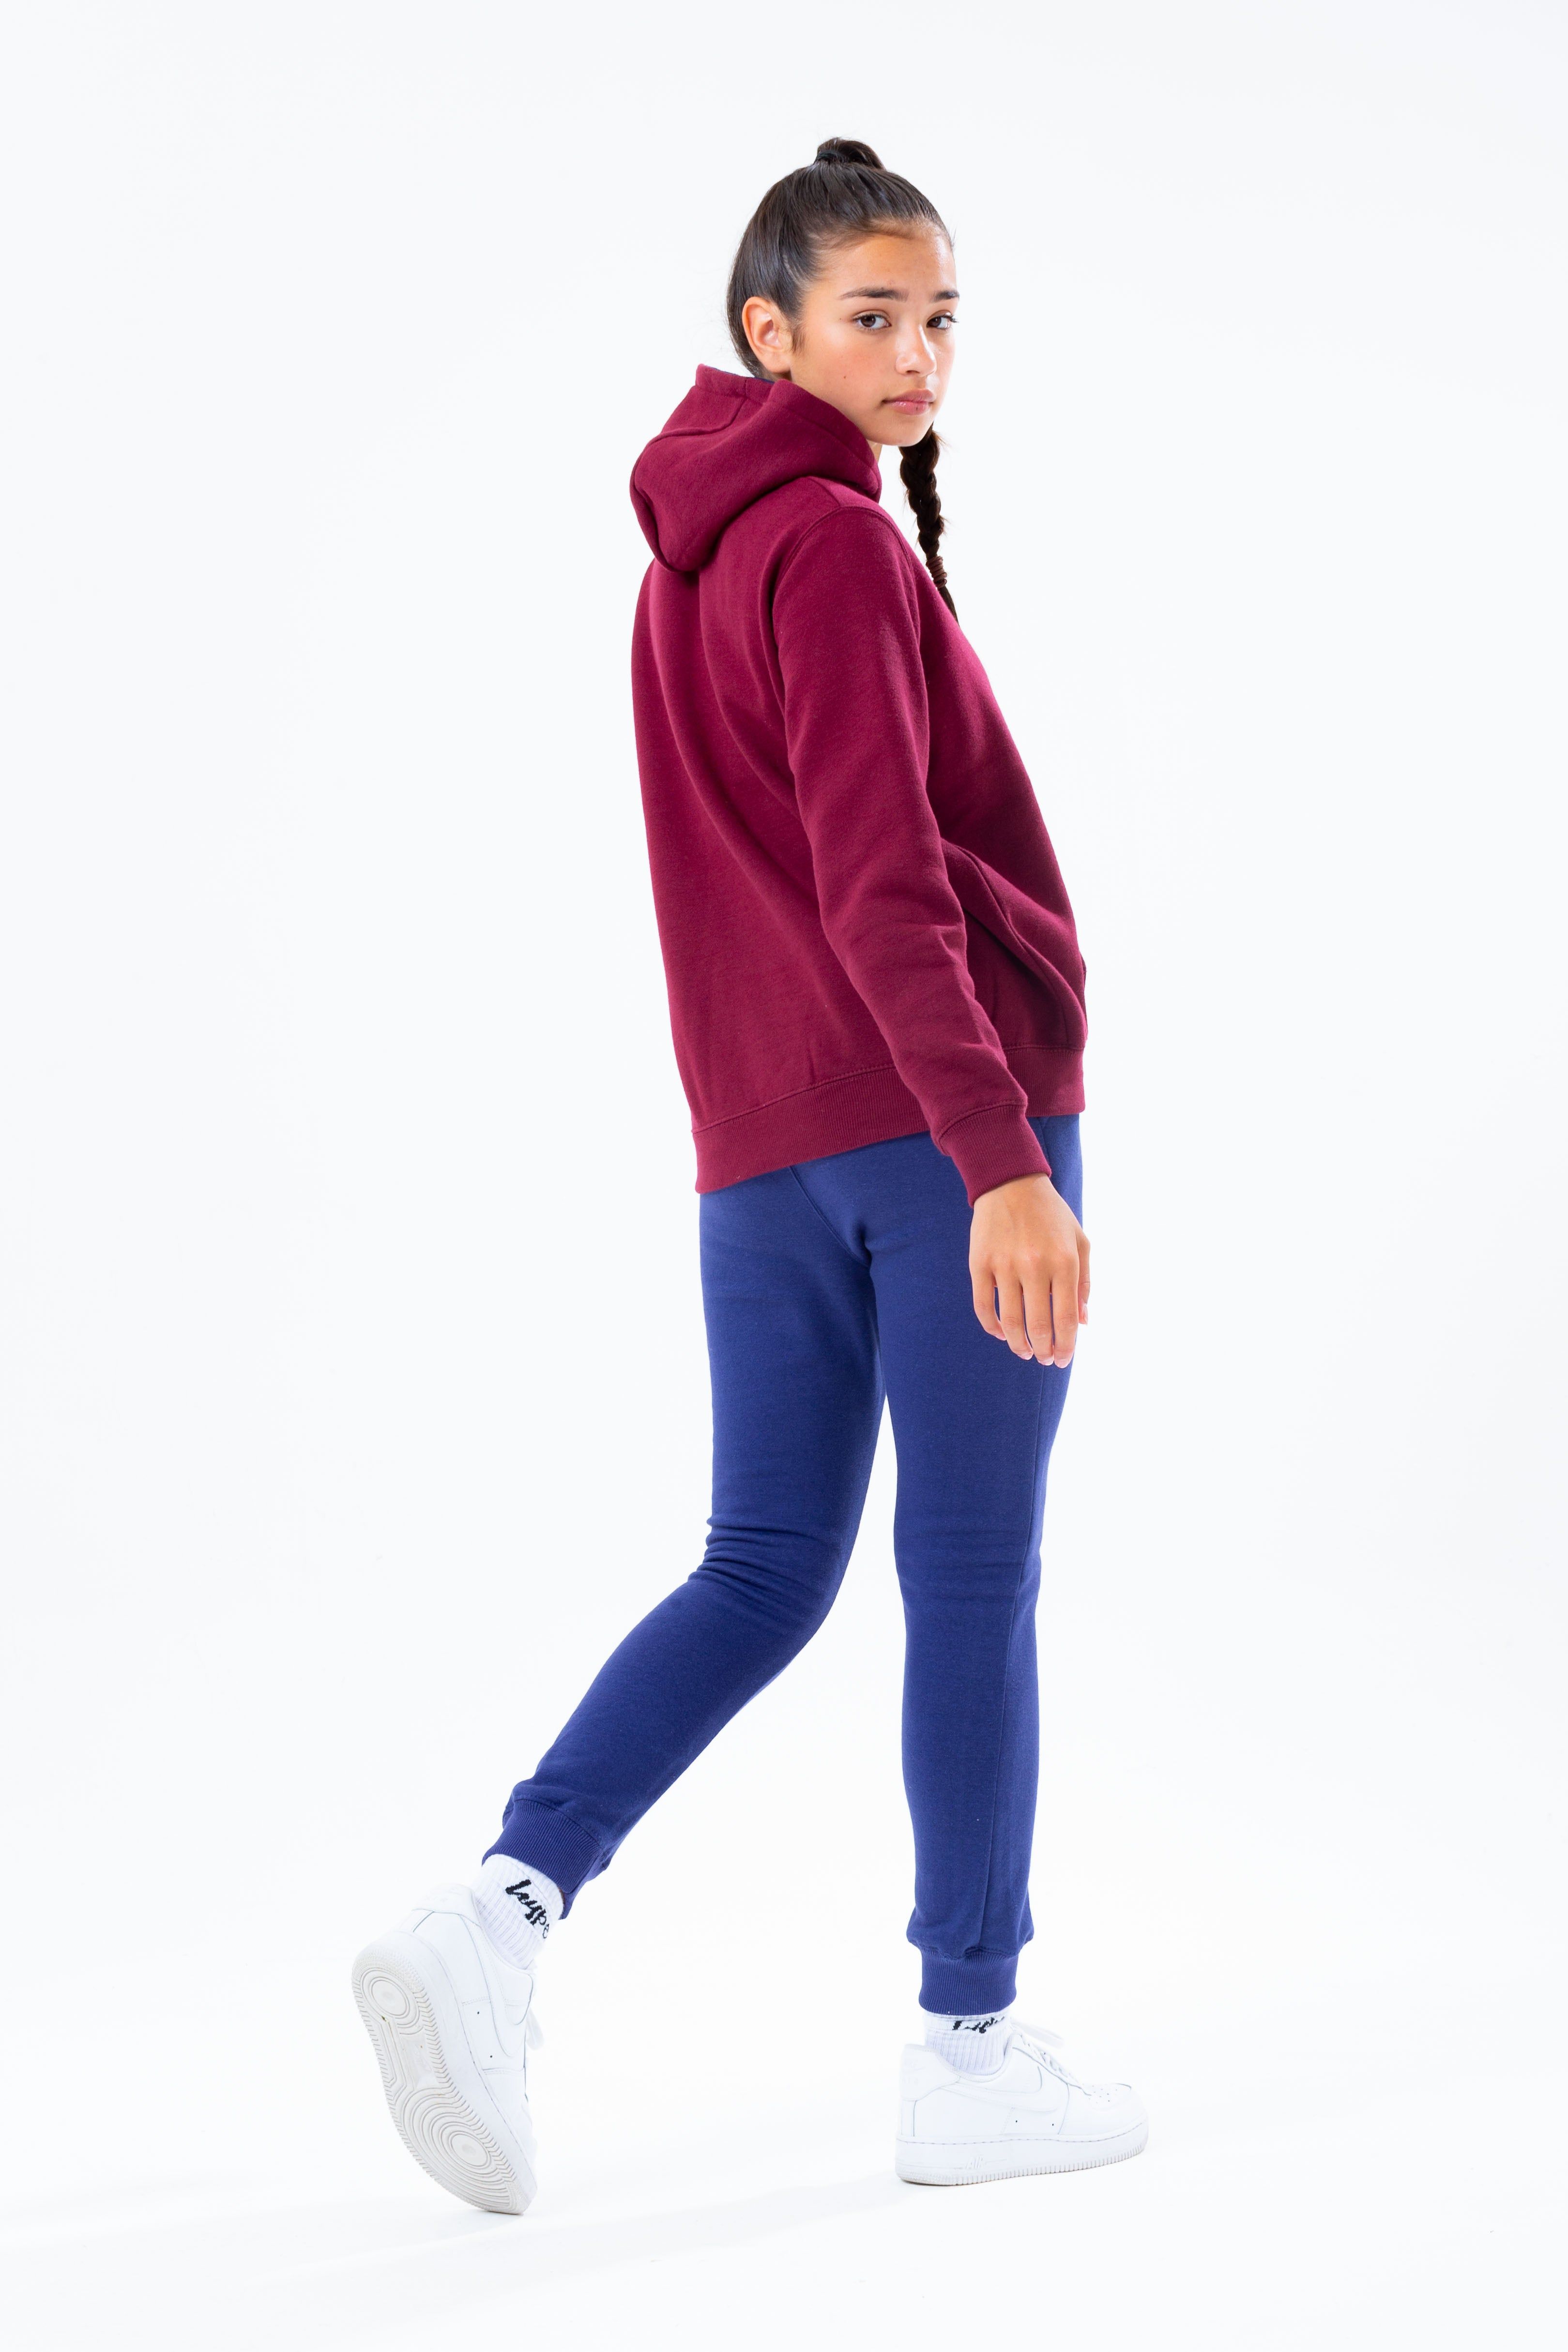 The HYPE. burgundy hoodie navy jogger kids set is perfect for off-duty casual days. Designed in a burgundy and navy fabric base with the ultimate soft-touch sweat fabric for supreme comfort. The kids hoodie highlights a fixed hood, fitted hem and cuffs, finished with the iconic HYPE. script logo  across the front. The joggers boast an elasticated waistband and fitted cuffs with the HYPE. mini script logo. Wear stand alone or as a set with a pair of box fresh kicks to complete the look. Machine wash at 30 degrees.